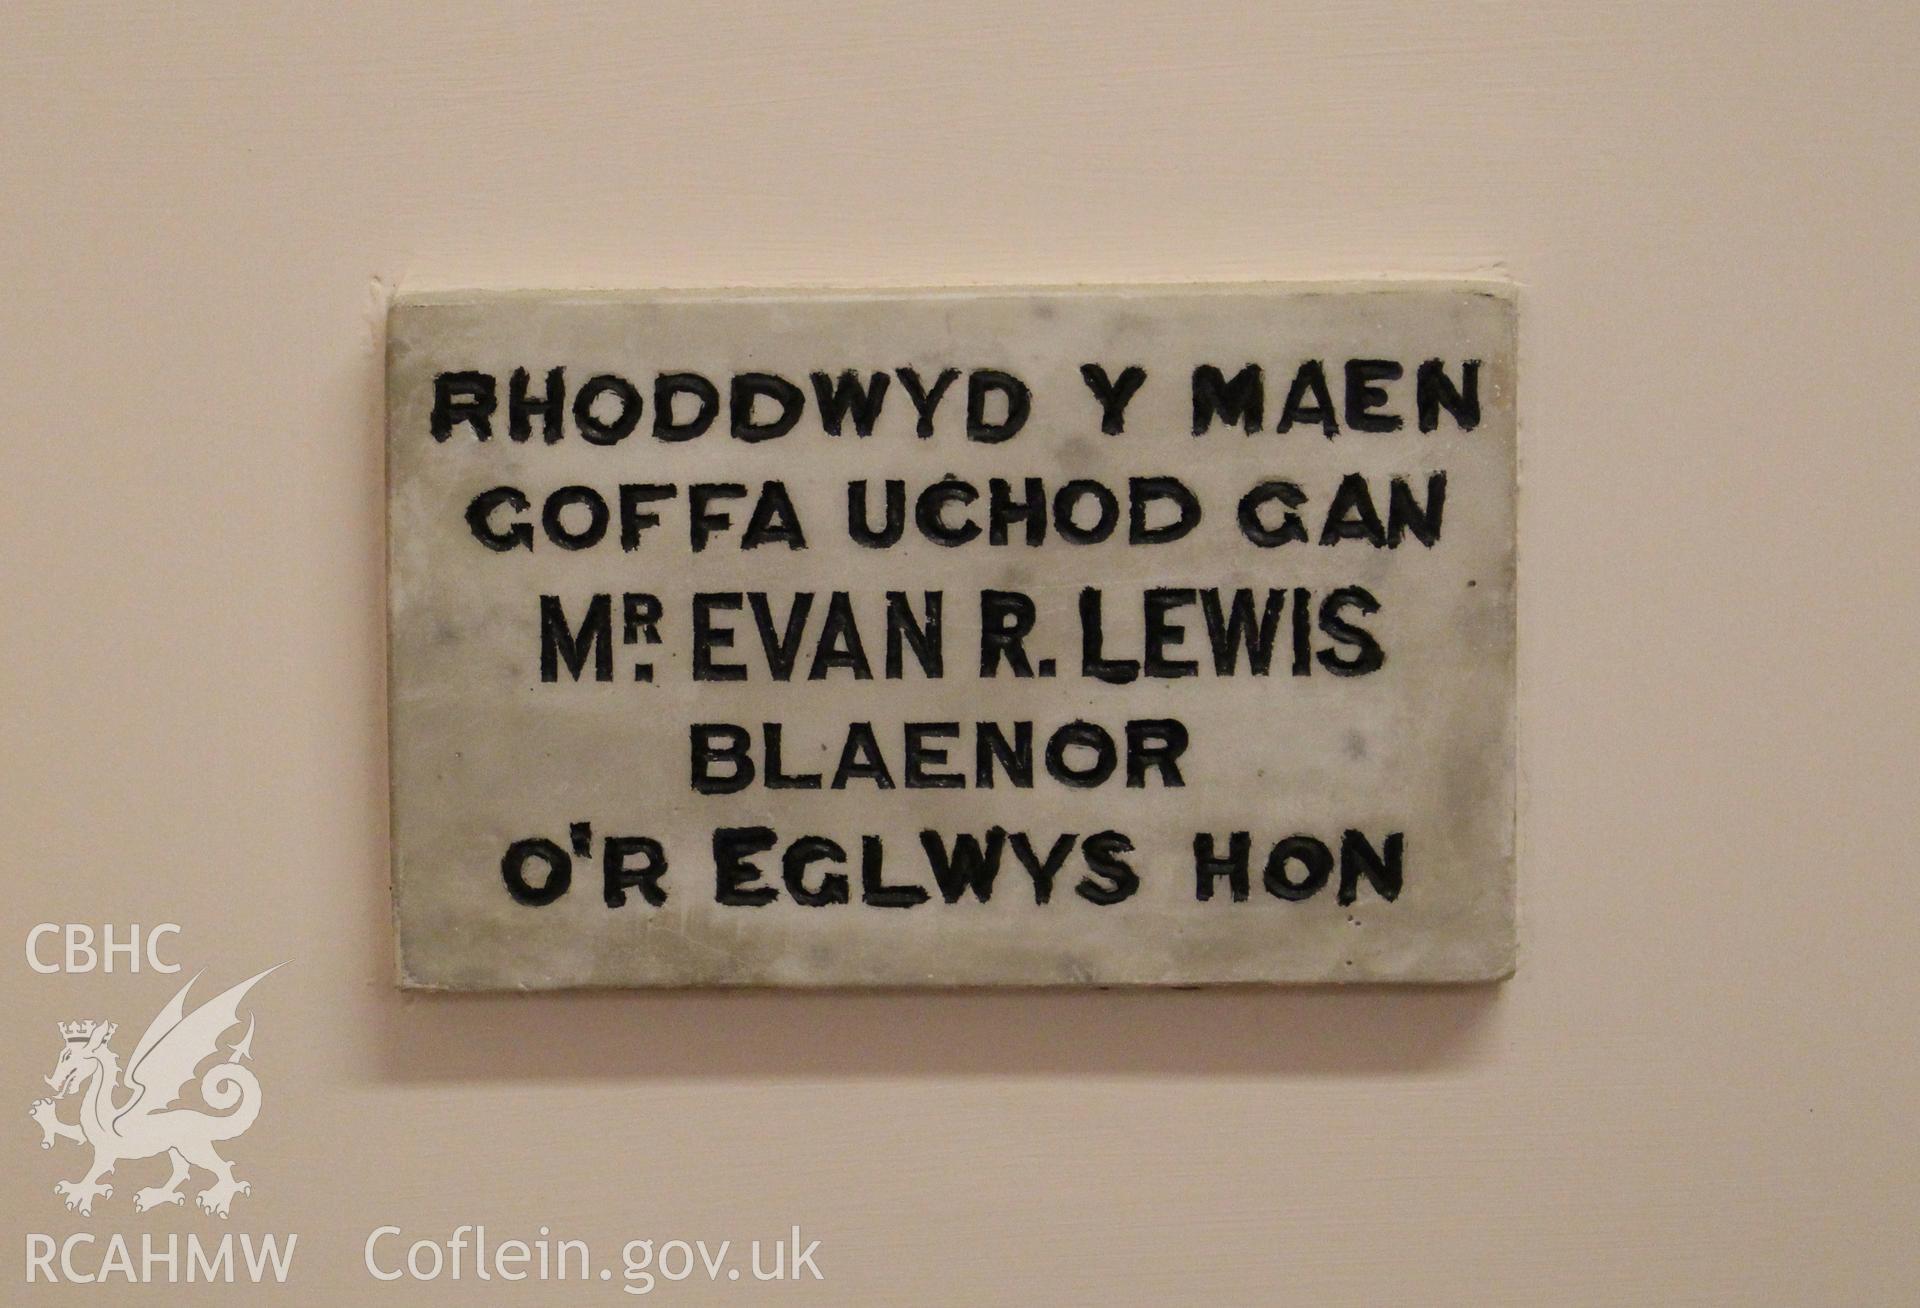 Translation: THE MEMORIAL STONE ABOVE WAS DONATED BY Mr. EVAN R. LEWIS ELDER OF THIS CHURCH. Philadelphia Welsh Calvinistic Methodist Chapel, Morriston. Photographic survey conducted by Sue Fielding, 13th May 2017.